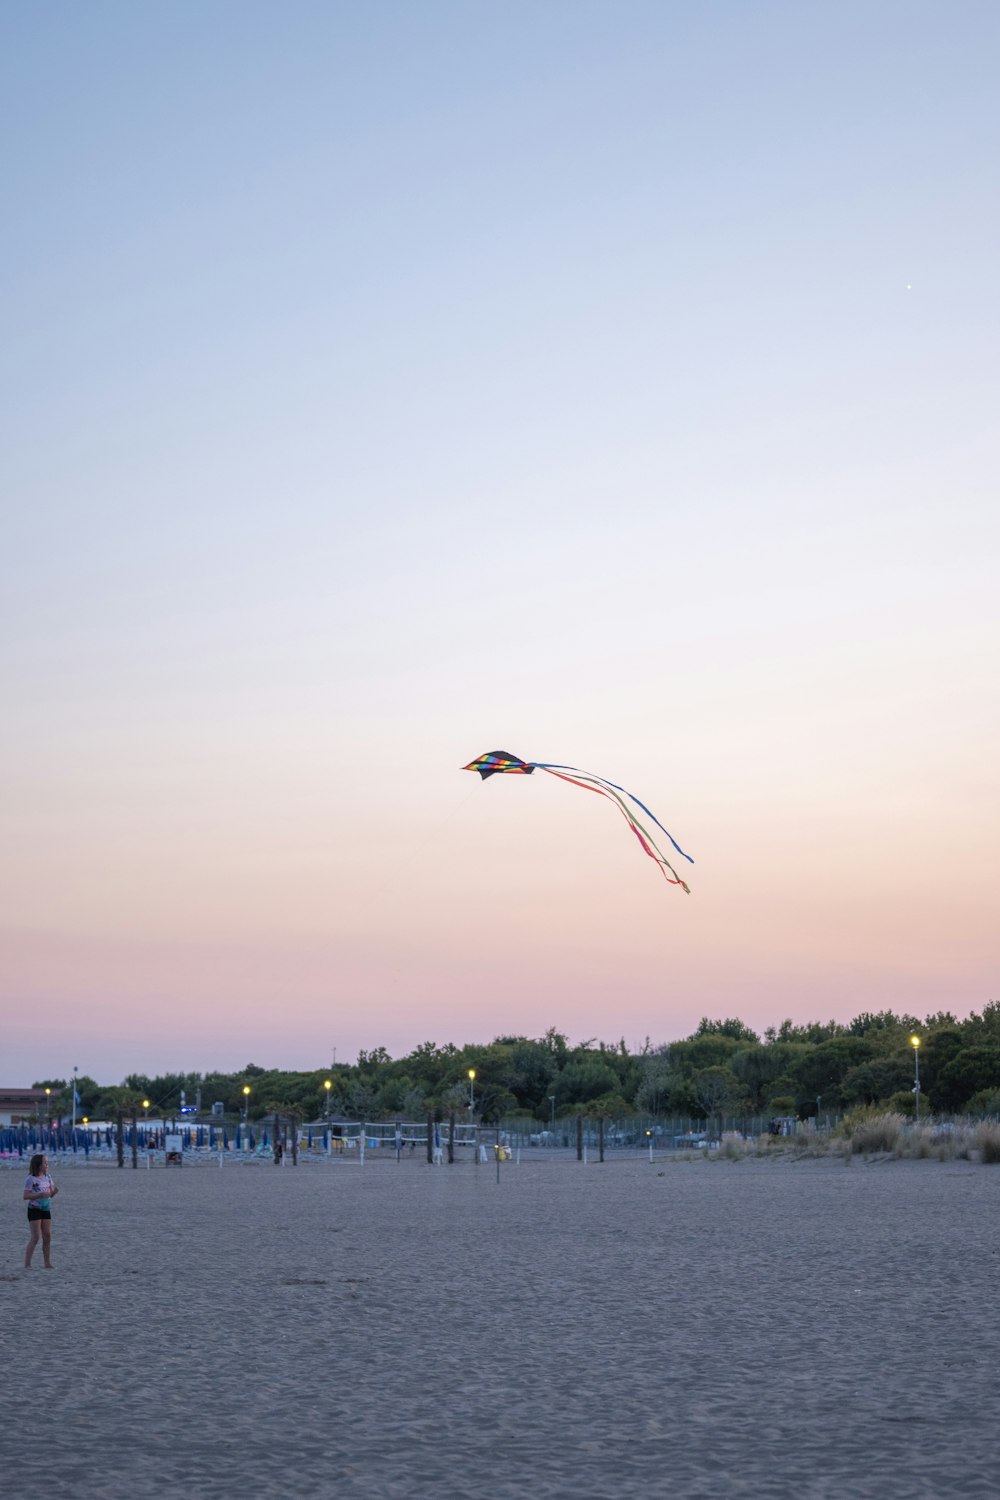 a person is flying a kite on the beach